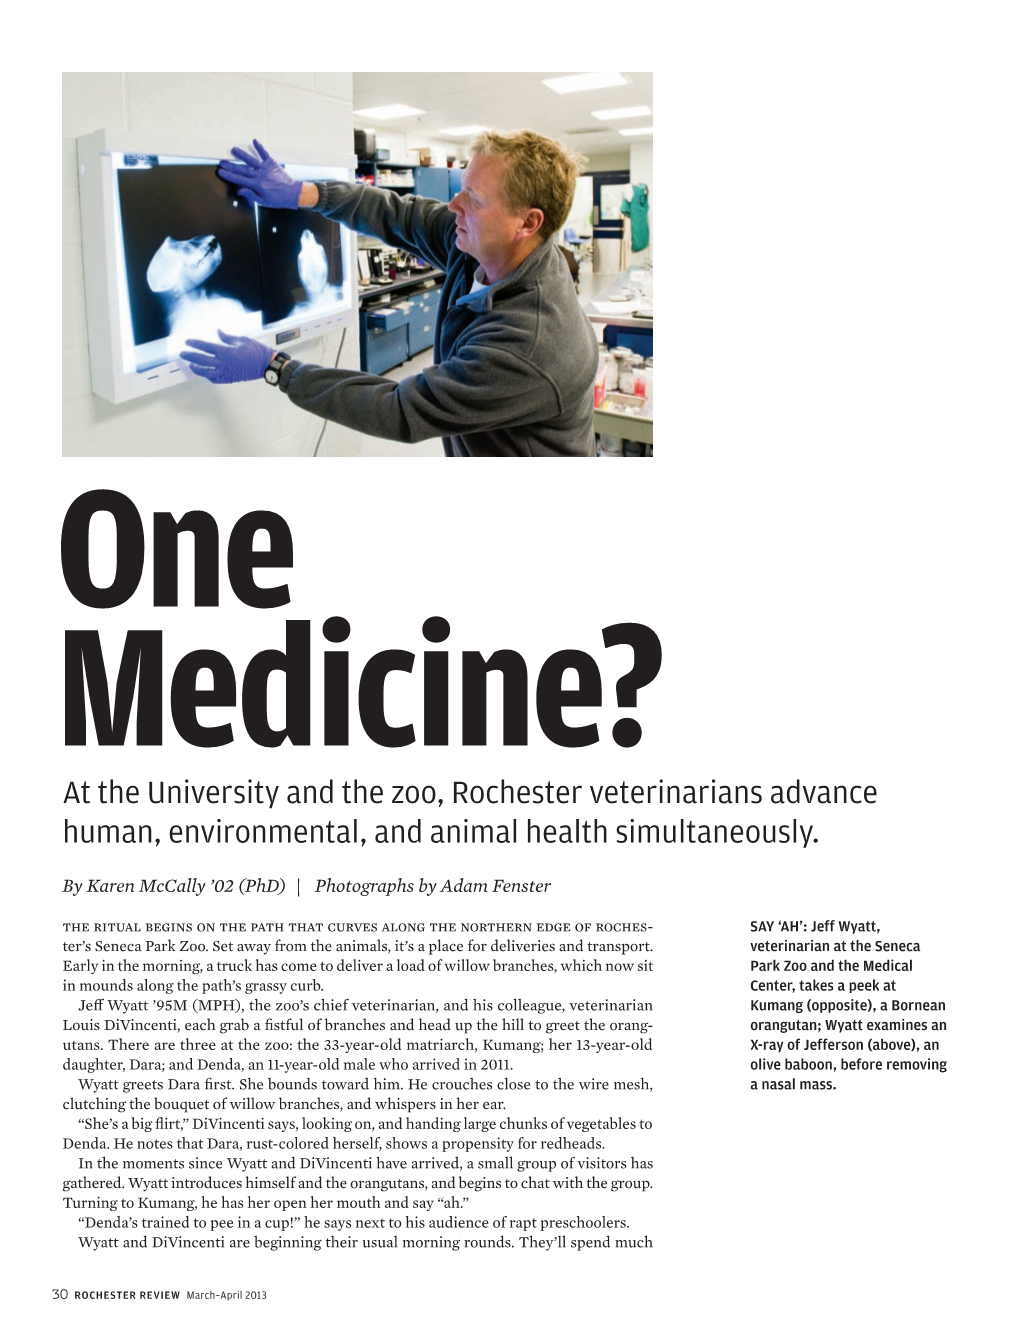 One Medicine? at the University and the Zoo, Rochester Veterinarians Advance Human, Environmental, and Animal Health Simultaneously